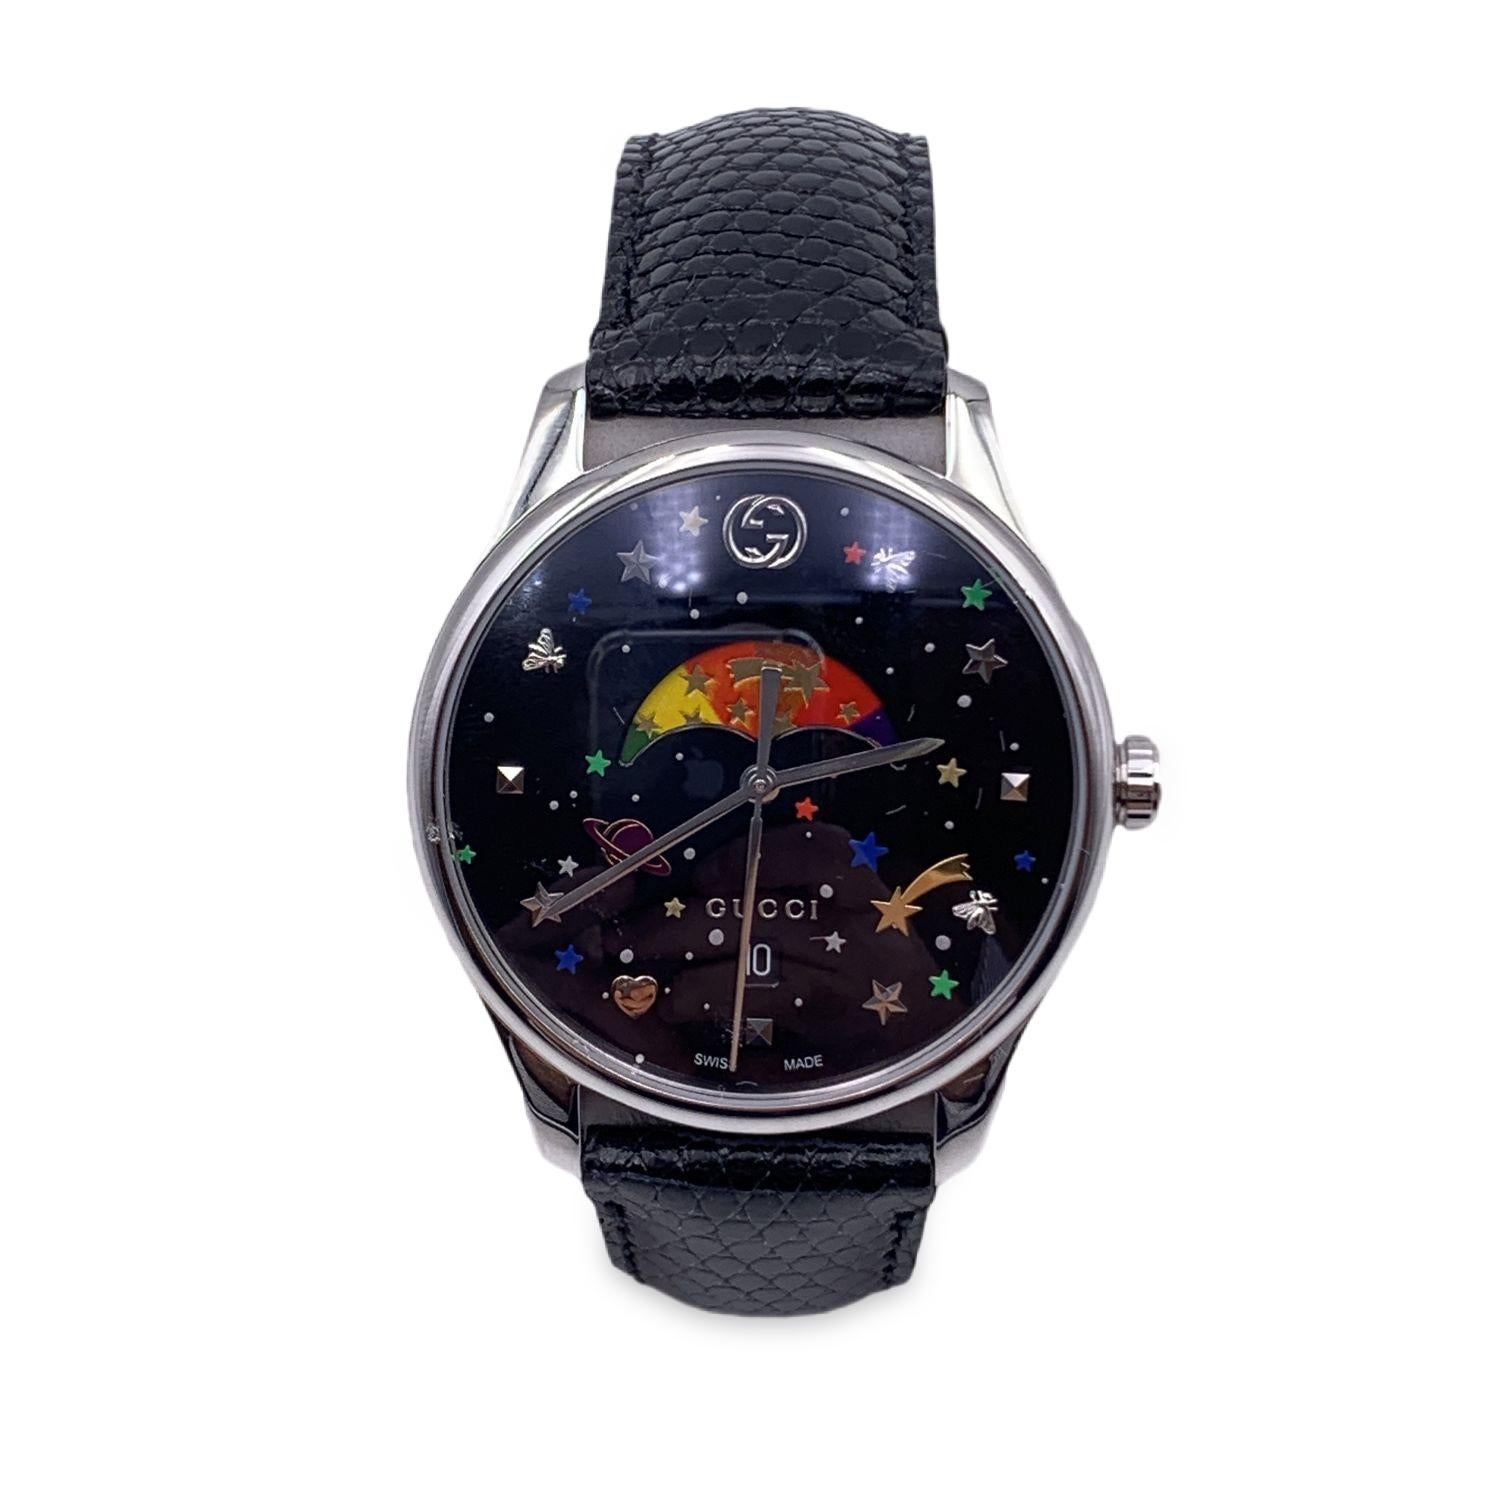 Gucci 'G-Timeless - Moonphase' stainless steel unisex watch. Model 126.4. Round steainless steel metal case (38 mm - crown included). Black dial with date function. This watch features multicolored bee, stars and planets motif. Ronda quartz